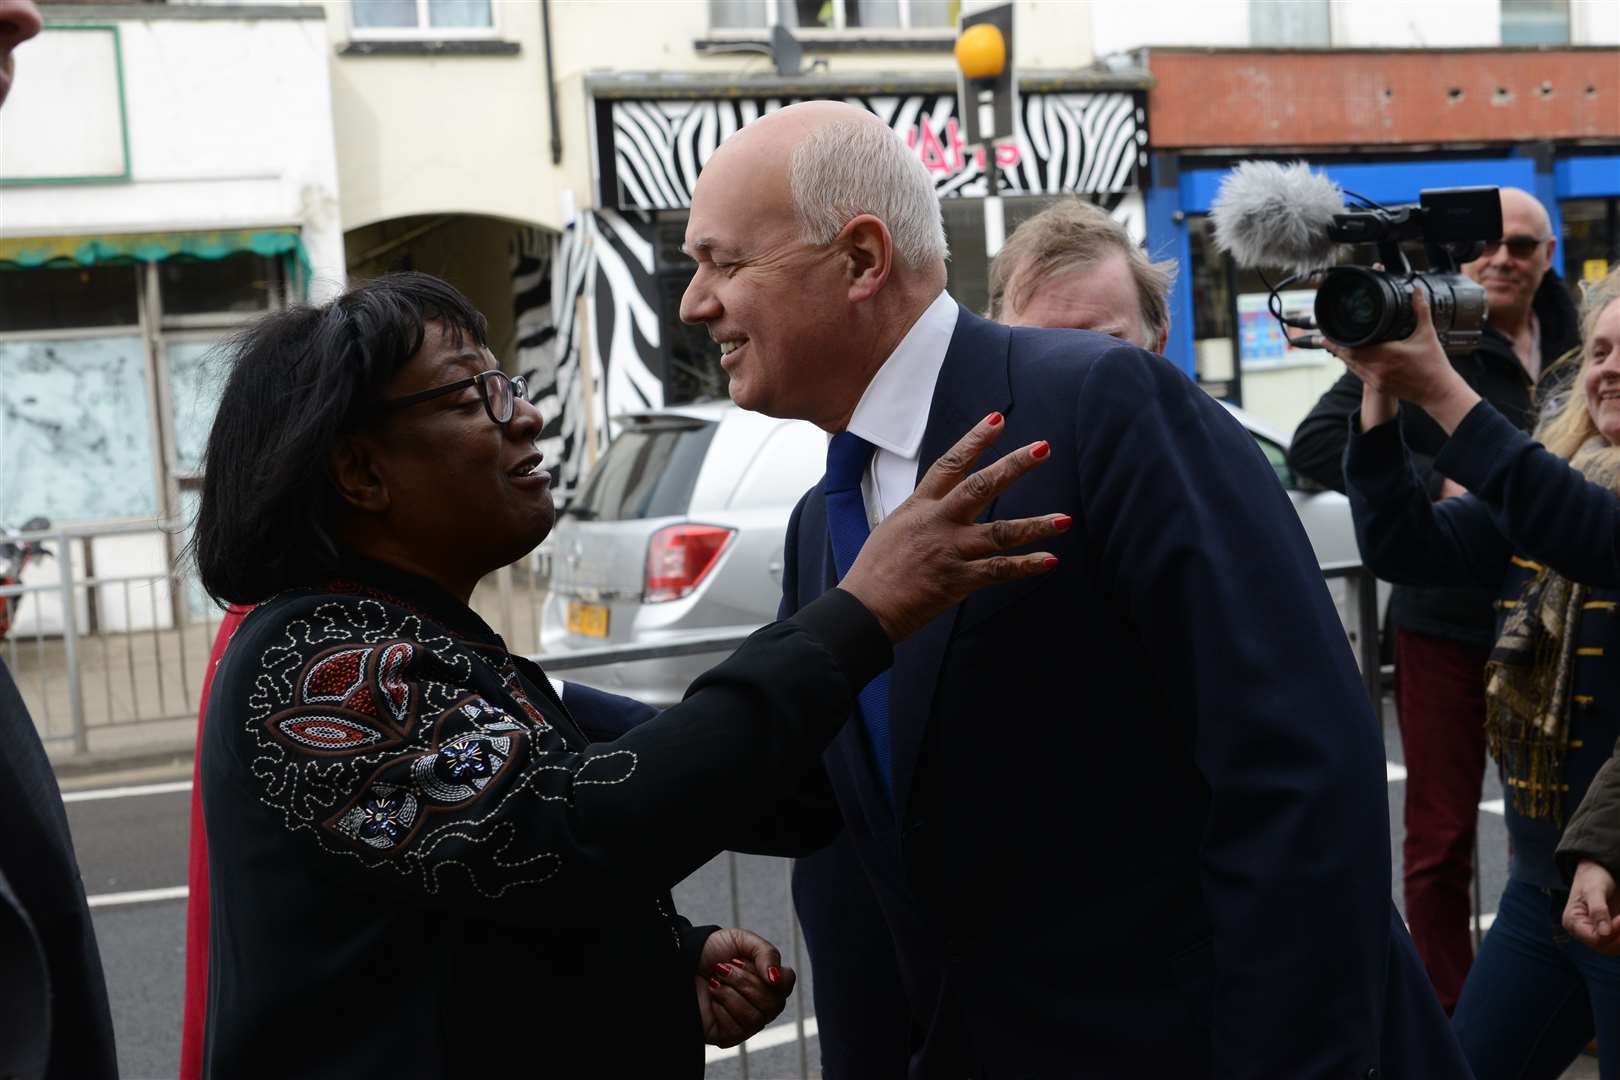 Iain Duncan Smith and Diane Abbott greet each other warmly after meeting unexpectedly in Margate. Picture: Gary Browne.